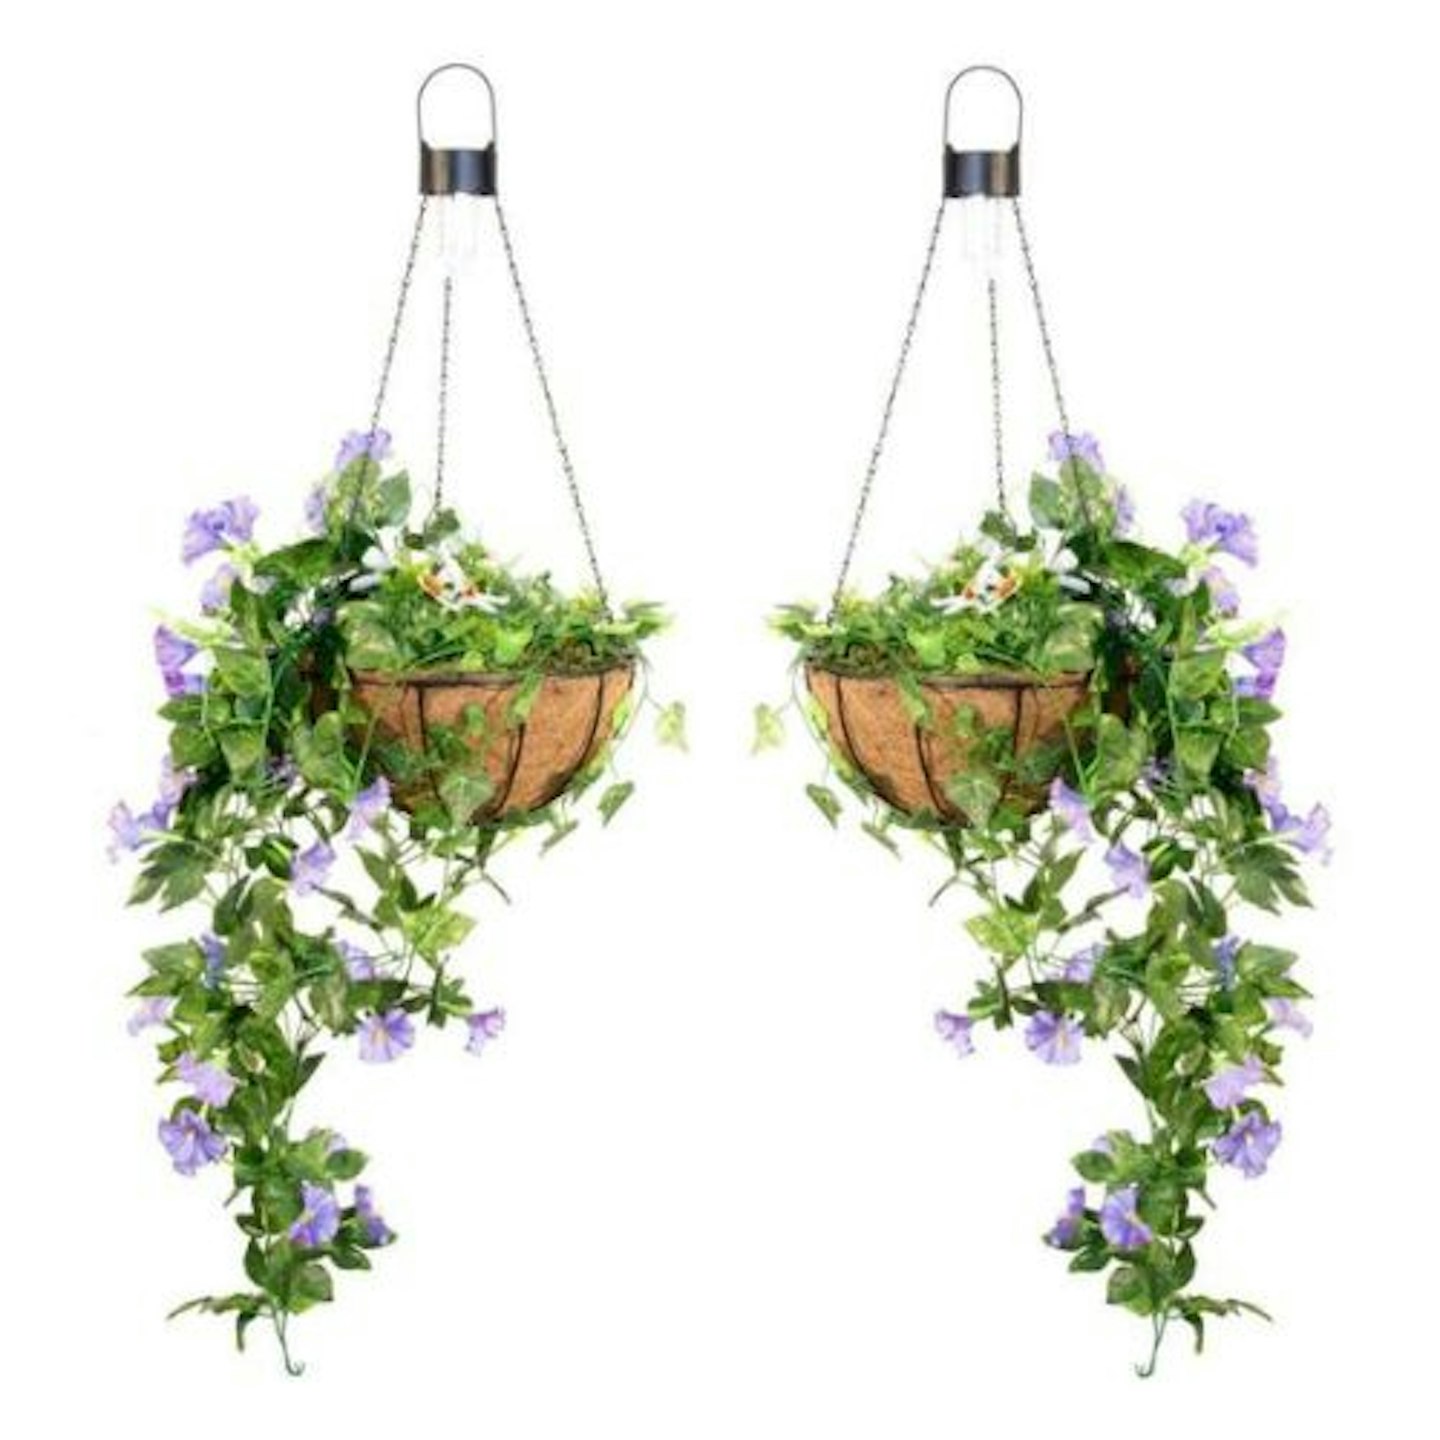 Purple Duranta Artificial Hanging Baskets with Solar Lights (Pair)